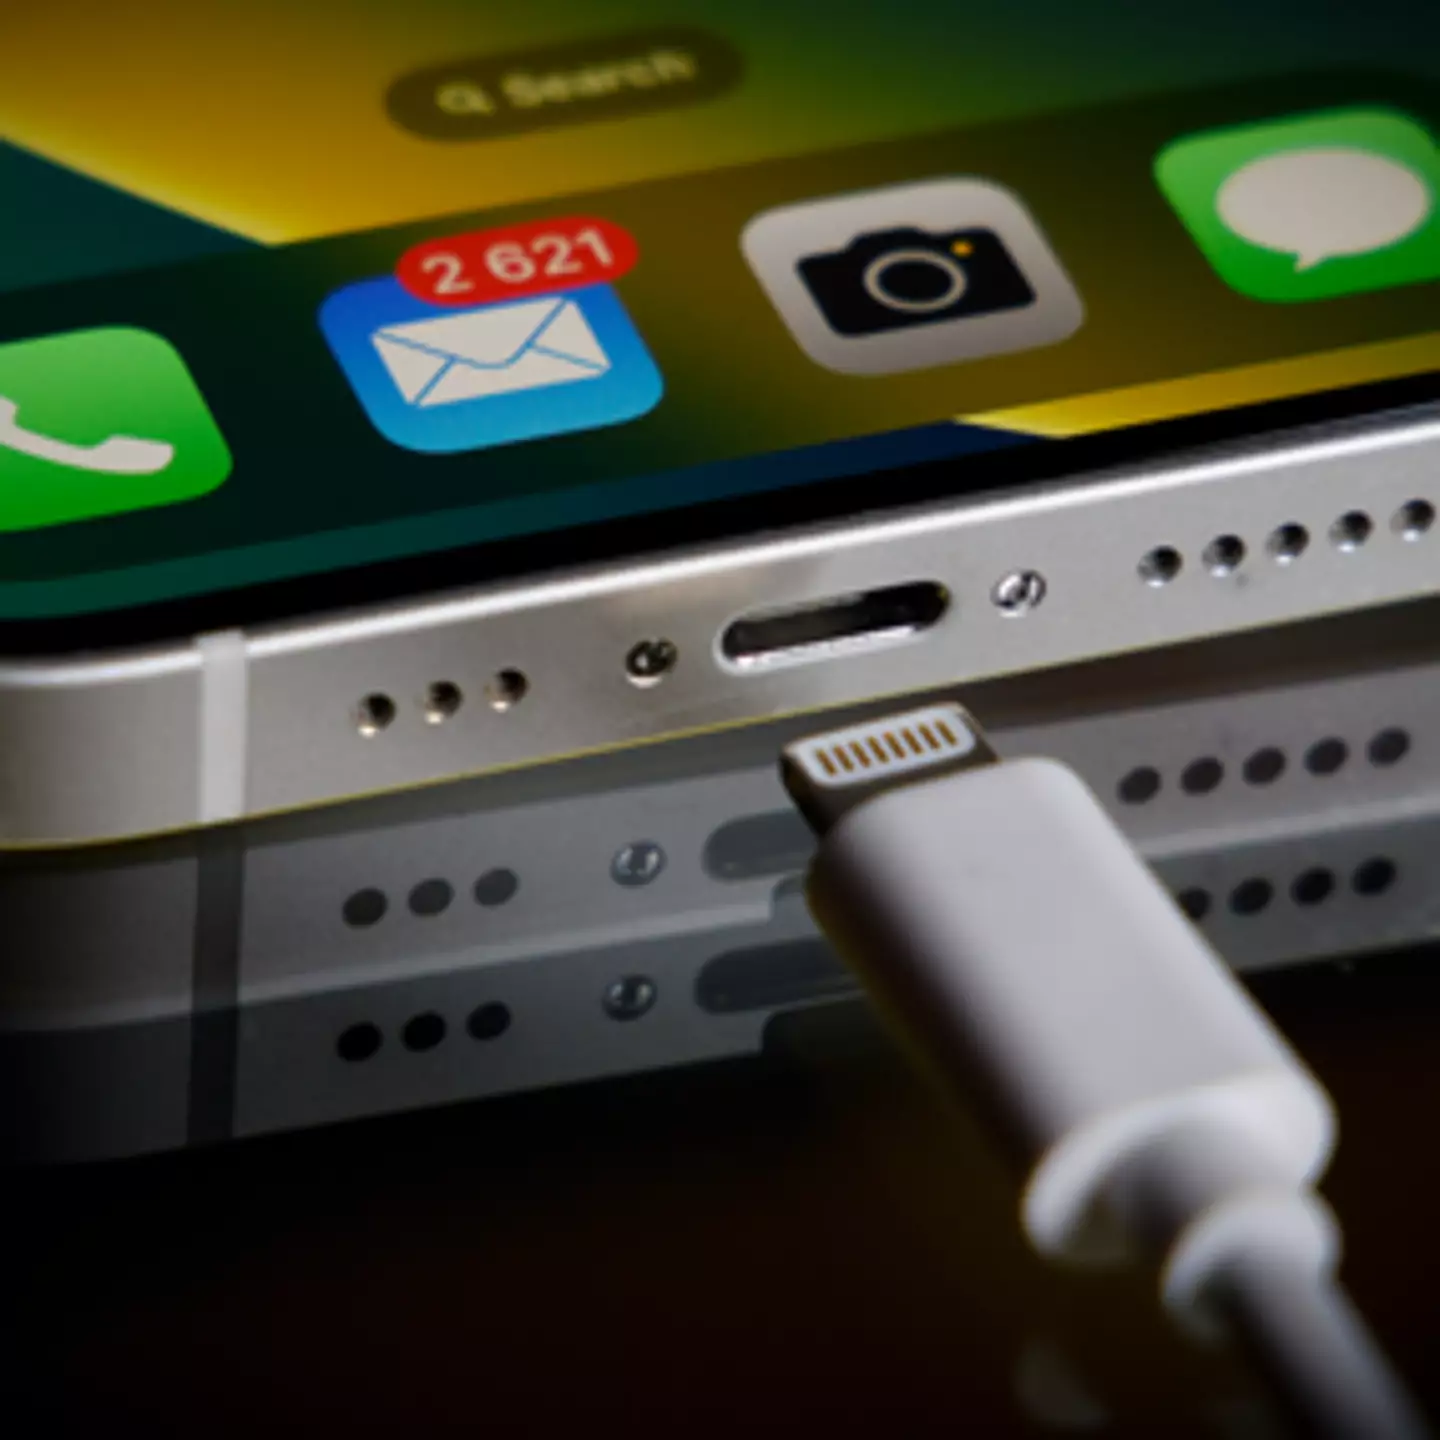 iPhone users in disbelief after discovering unusual charging hack they didn't know existed